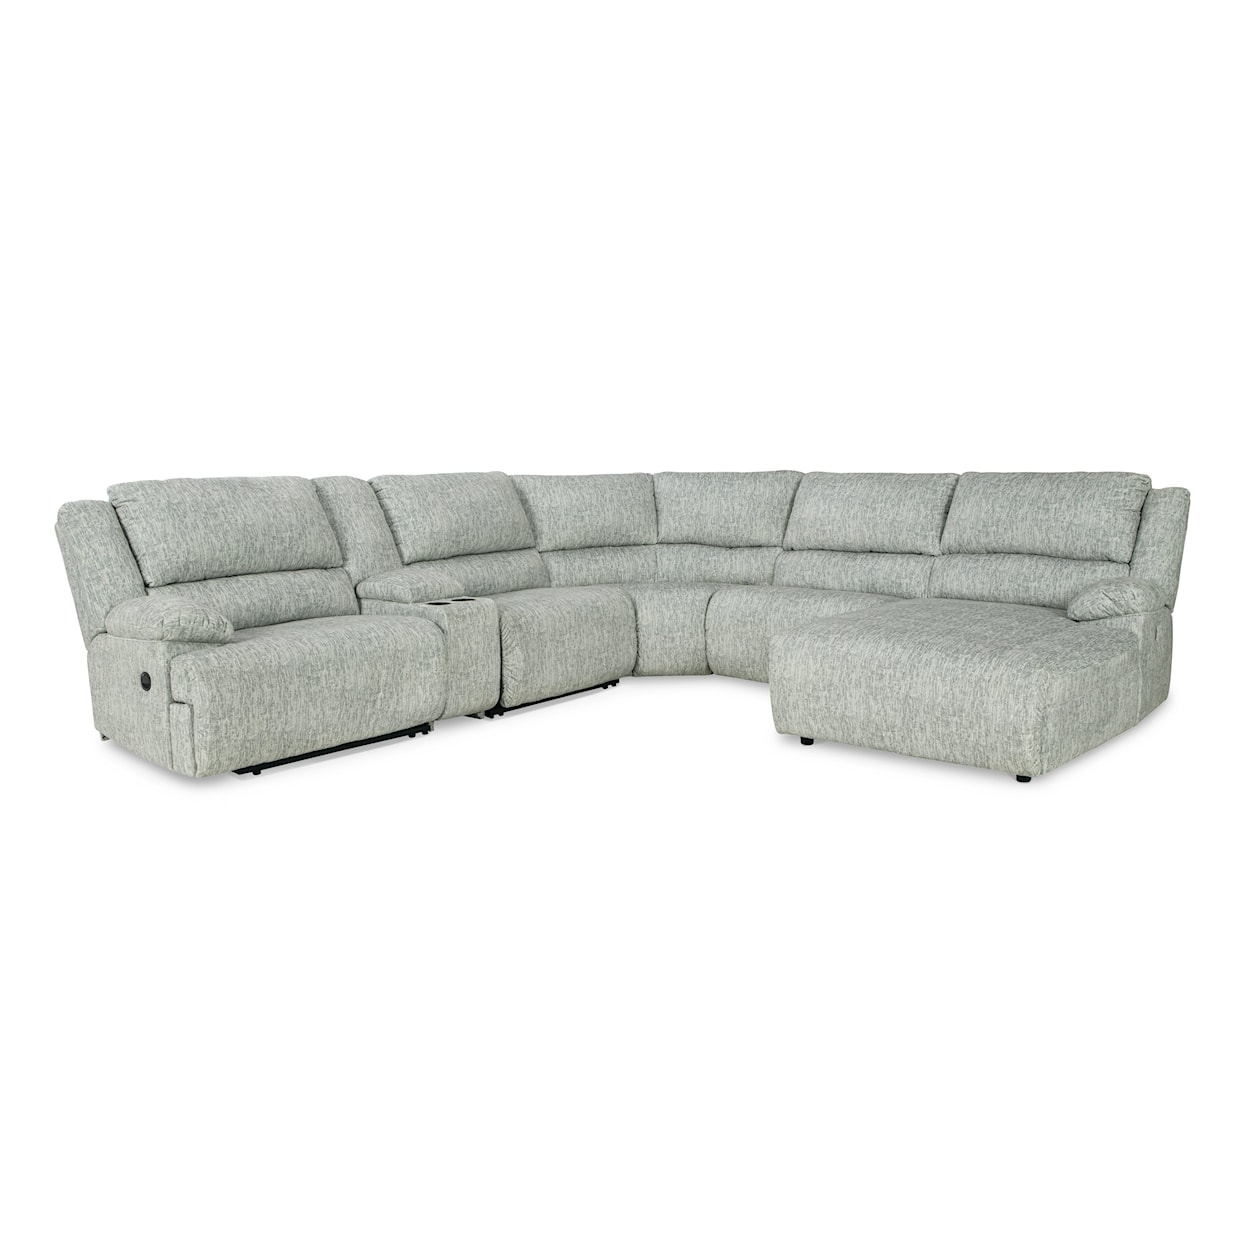 Signature Design McClelland 6-Piece Reclining Sectional with Chaise